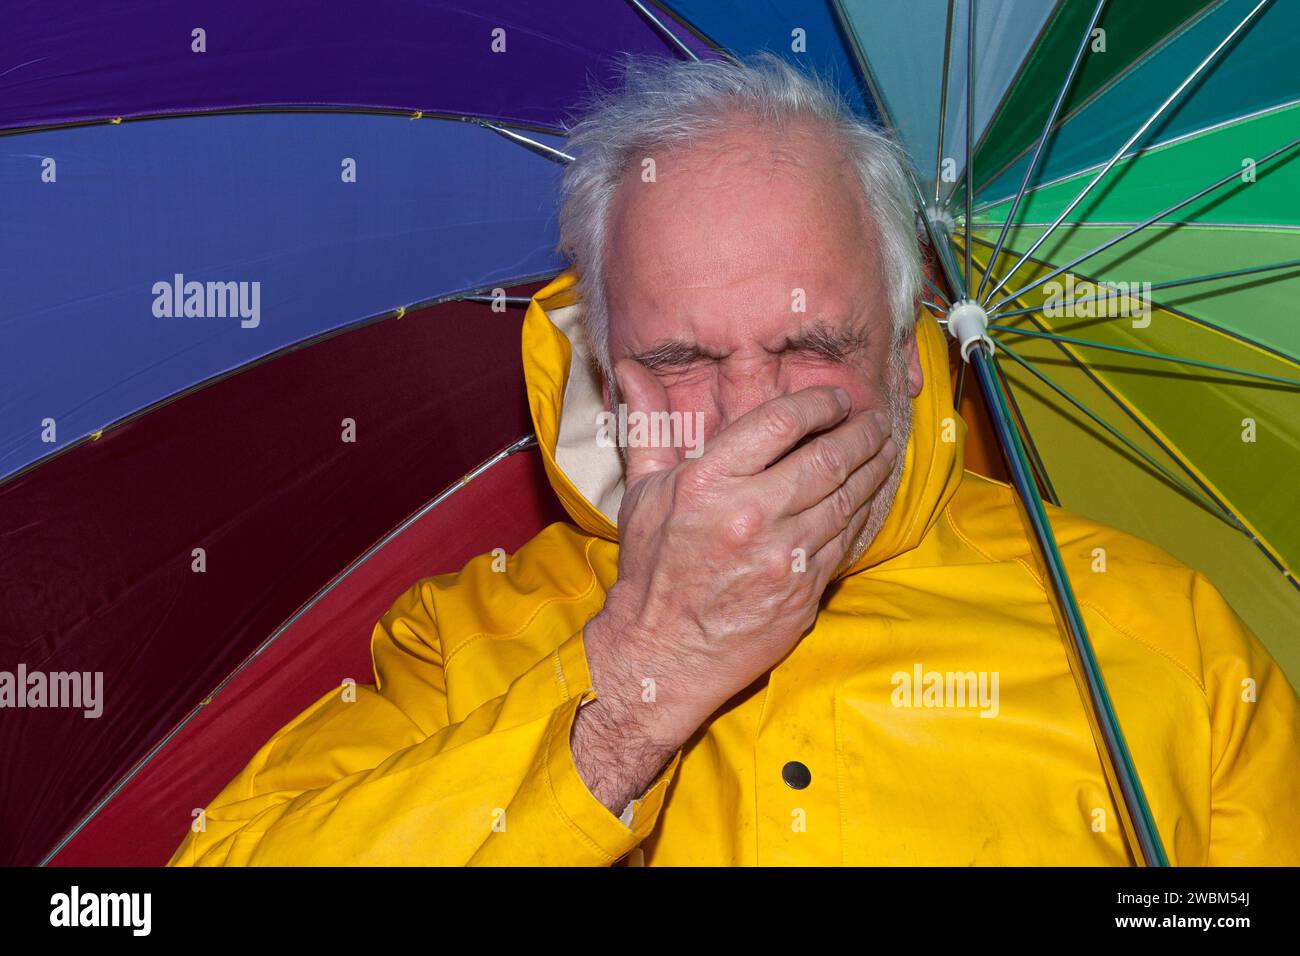 Man in yellow rain jacket and umbrella sneezing in rainy weather, showing cold symptoms. Realistic representation of rainy days and health. Stock Photo